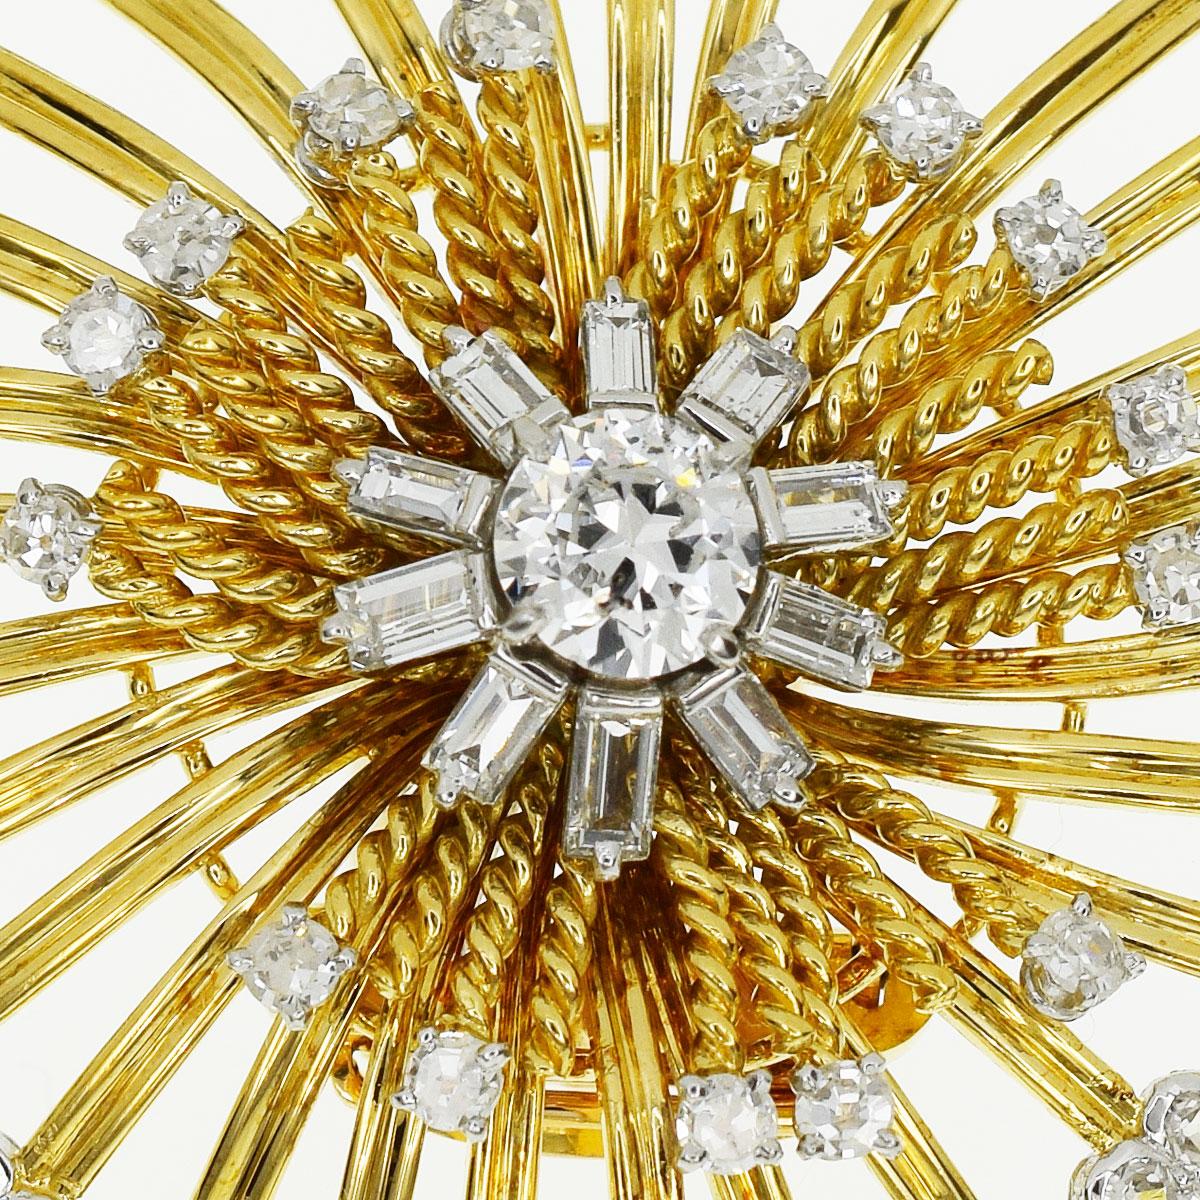 Brand:Cartier
Name:Sunburst clip brooch
Material:72P diamond (D4.40ct), 750 K18 YG yellow gold, Pt platinum
Weight:23.3g（Approx)
Size（inch）:H48mm×W47mm / H1.88in×W1.85in（Approx)
Comes with:Cartier case, Cartier Certificate(Nov 2010), Cartier